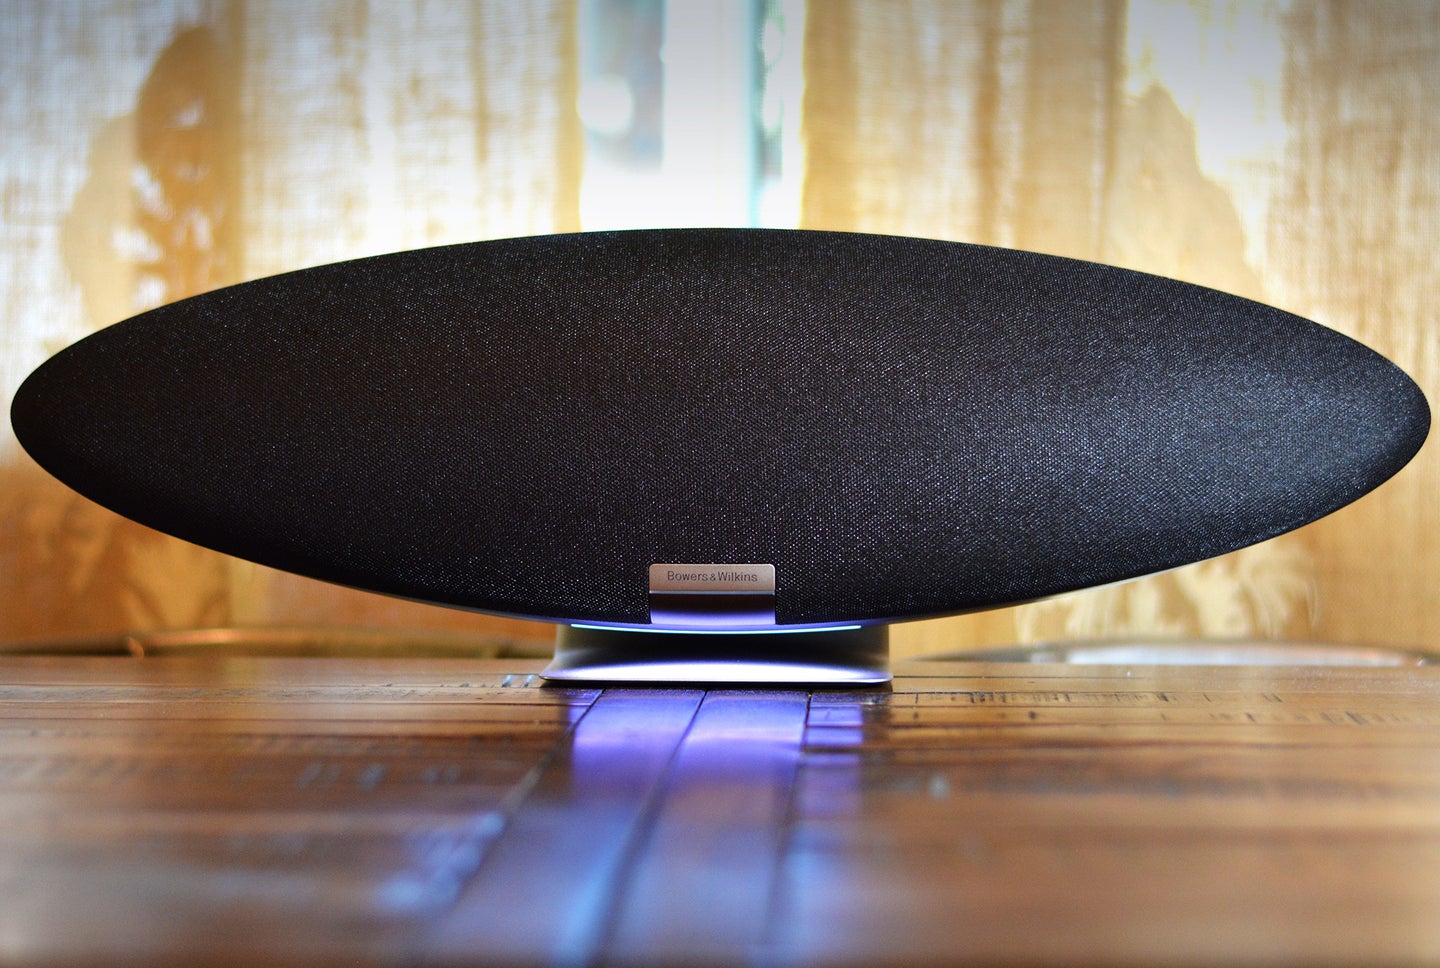 Bowers and Wilkins speaker with down-firing LED light